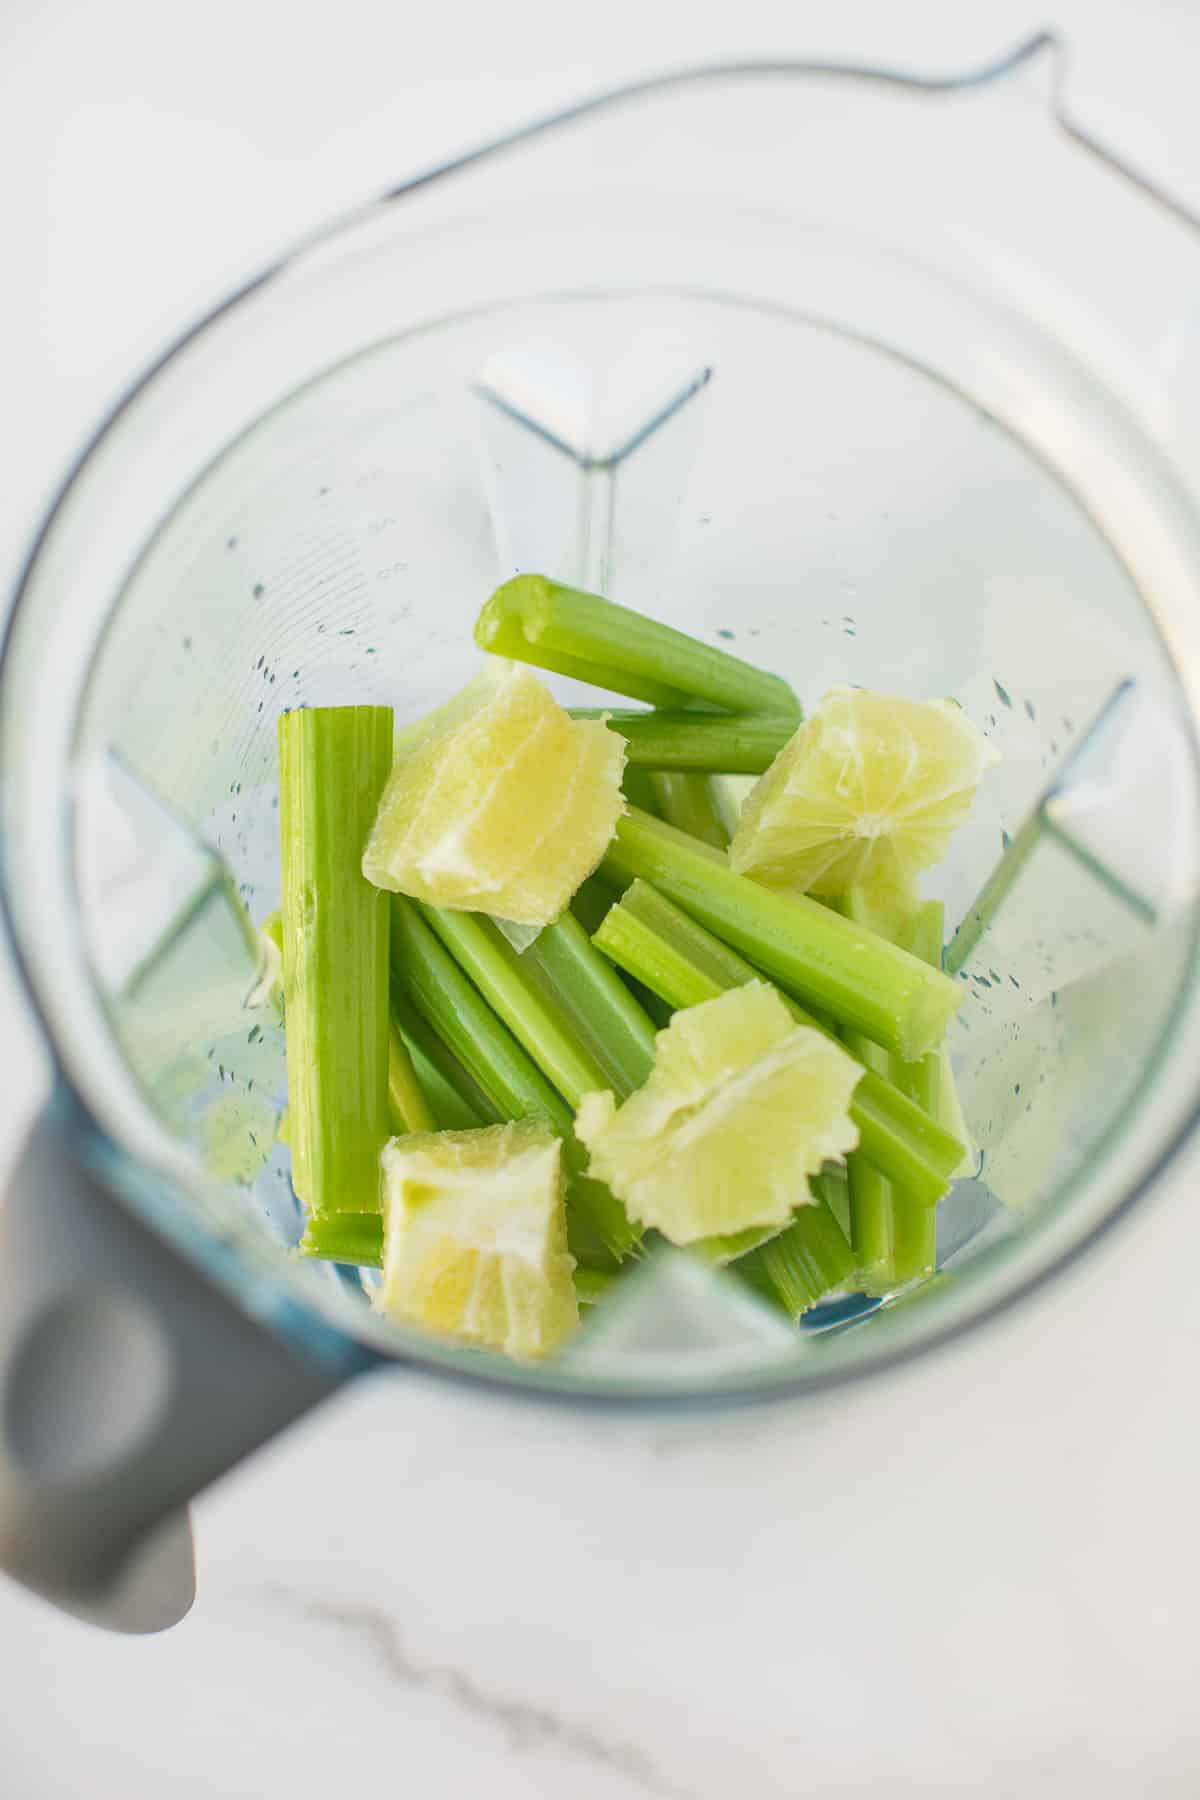 celery stalks and peeled limes in the base of a vitamix.